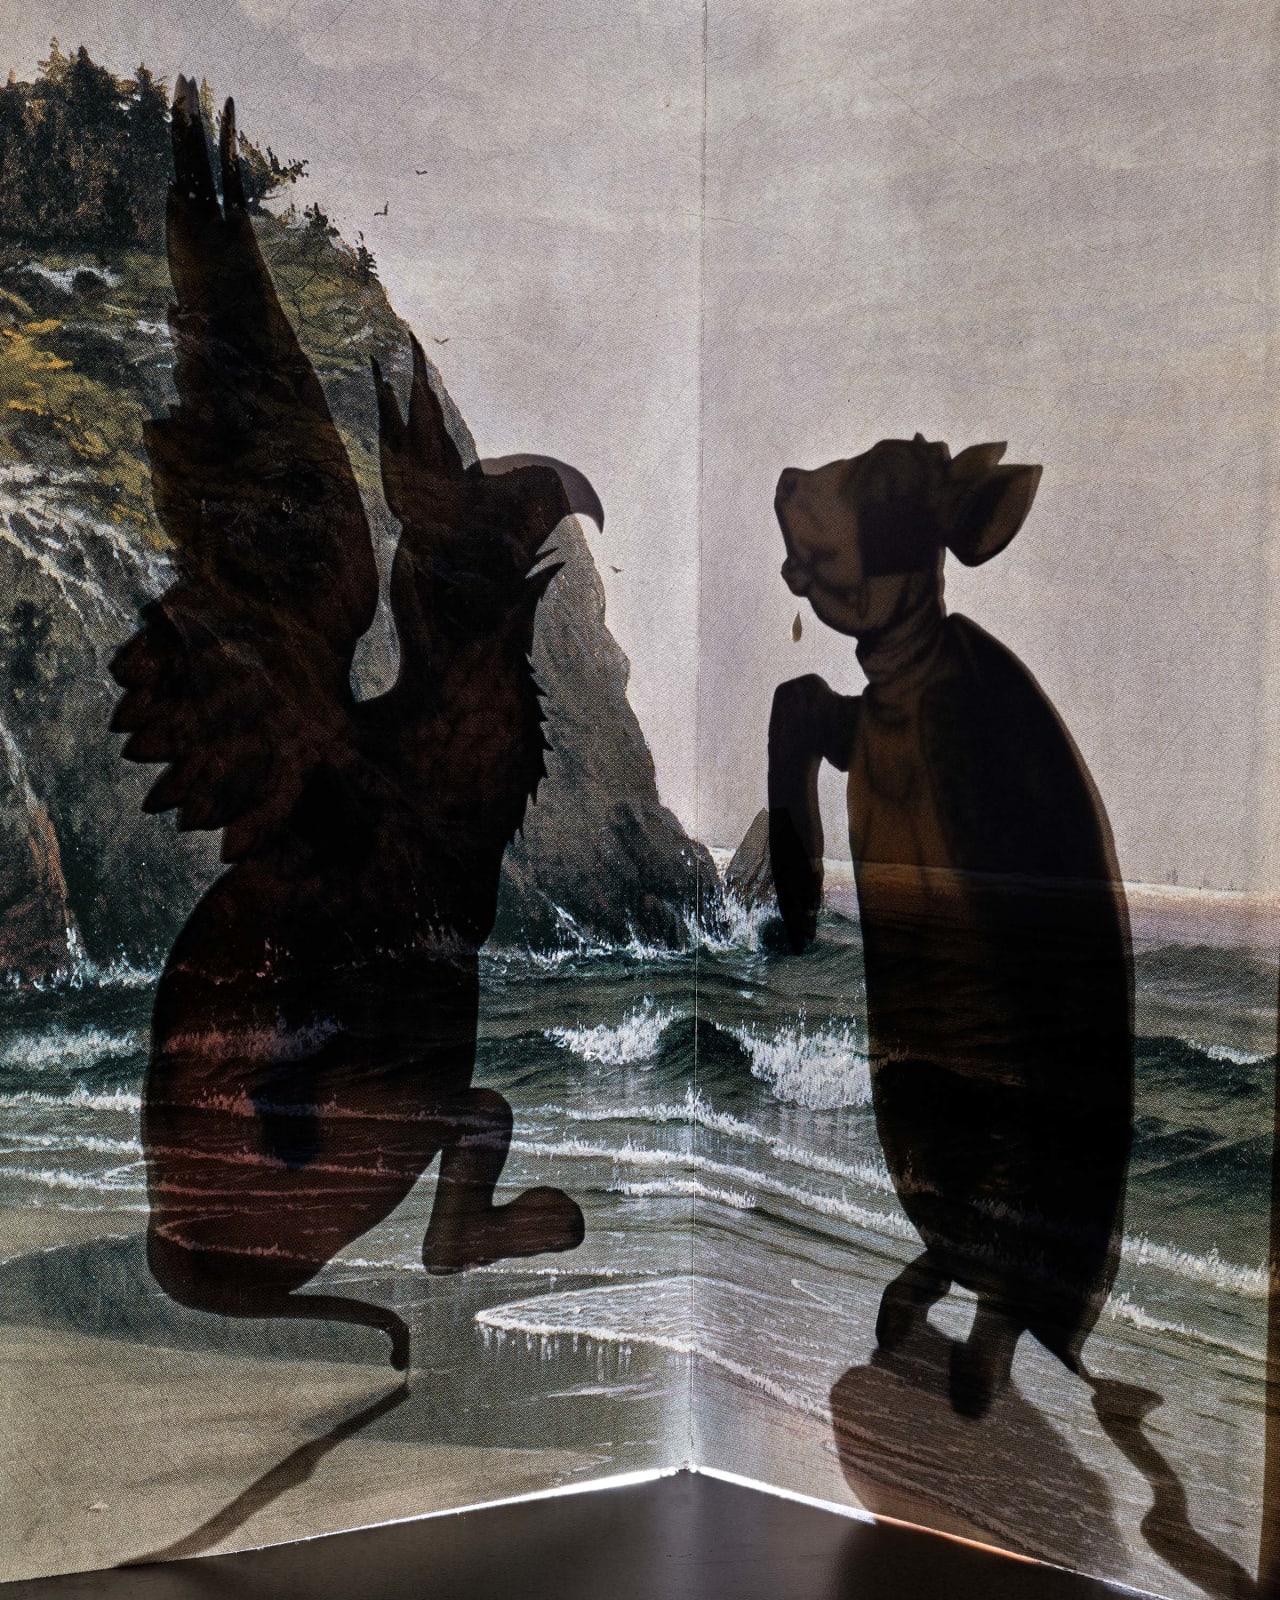 Abelardo Morell Alice in Wonderland Mock Turtle and chimera silhouettes with ocean background